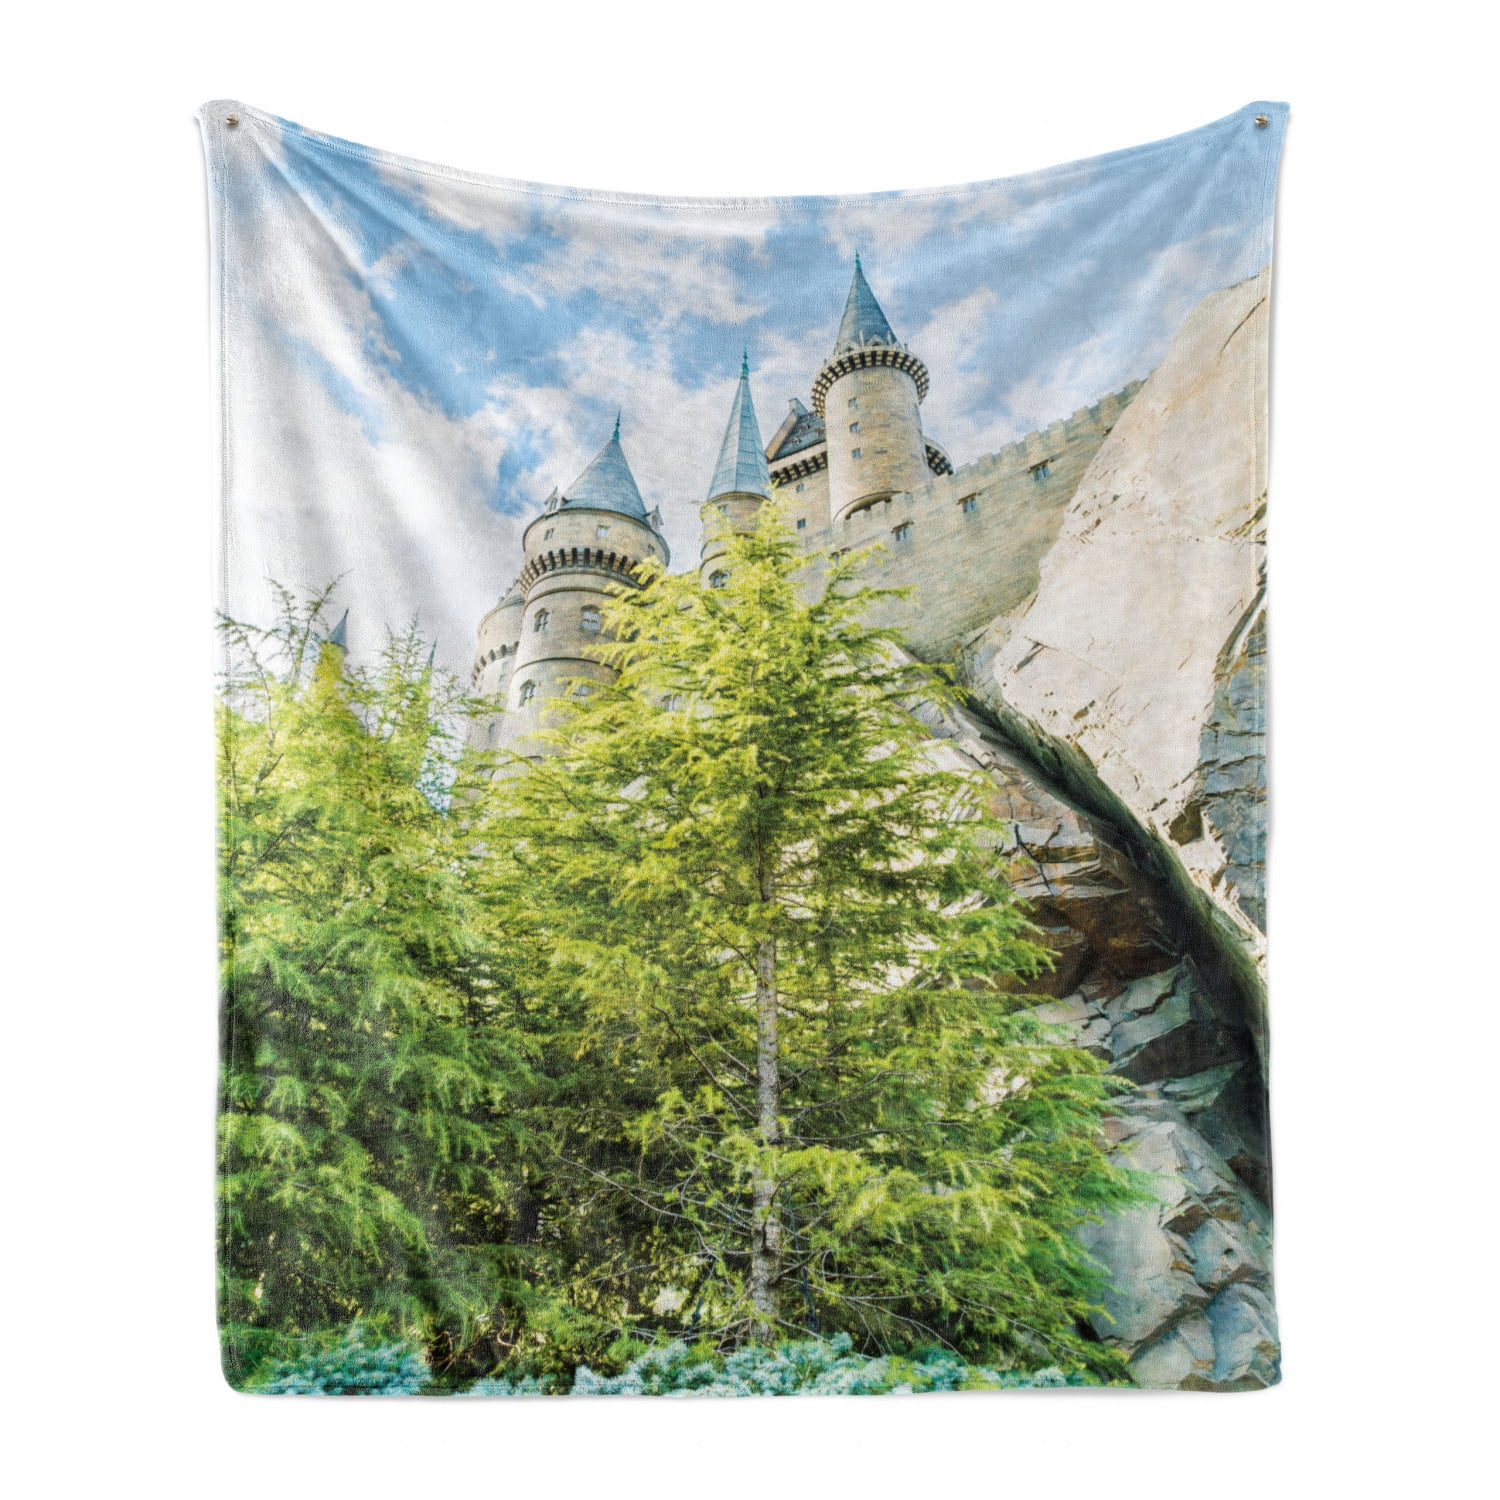 Cozy Plush for Indoor and Outdoor Use 50 x 60 Green Blue Beige Ambesonne Wizard Soft Flannel Fleece Throw Blanket Witchcraft and Wizard Castle in Woods Replica in Japan Picture Print